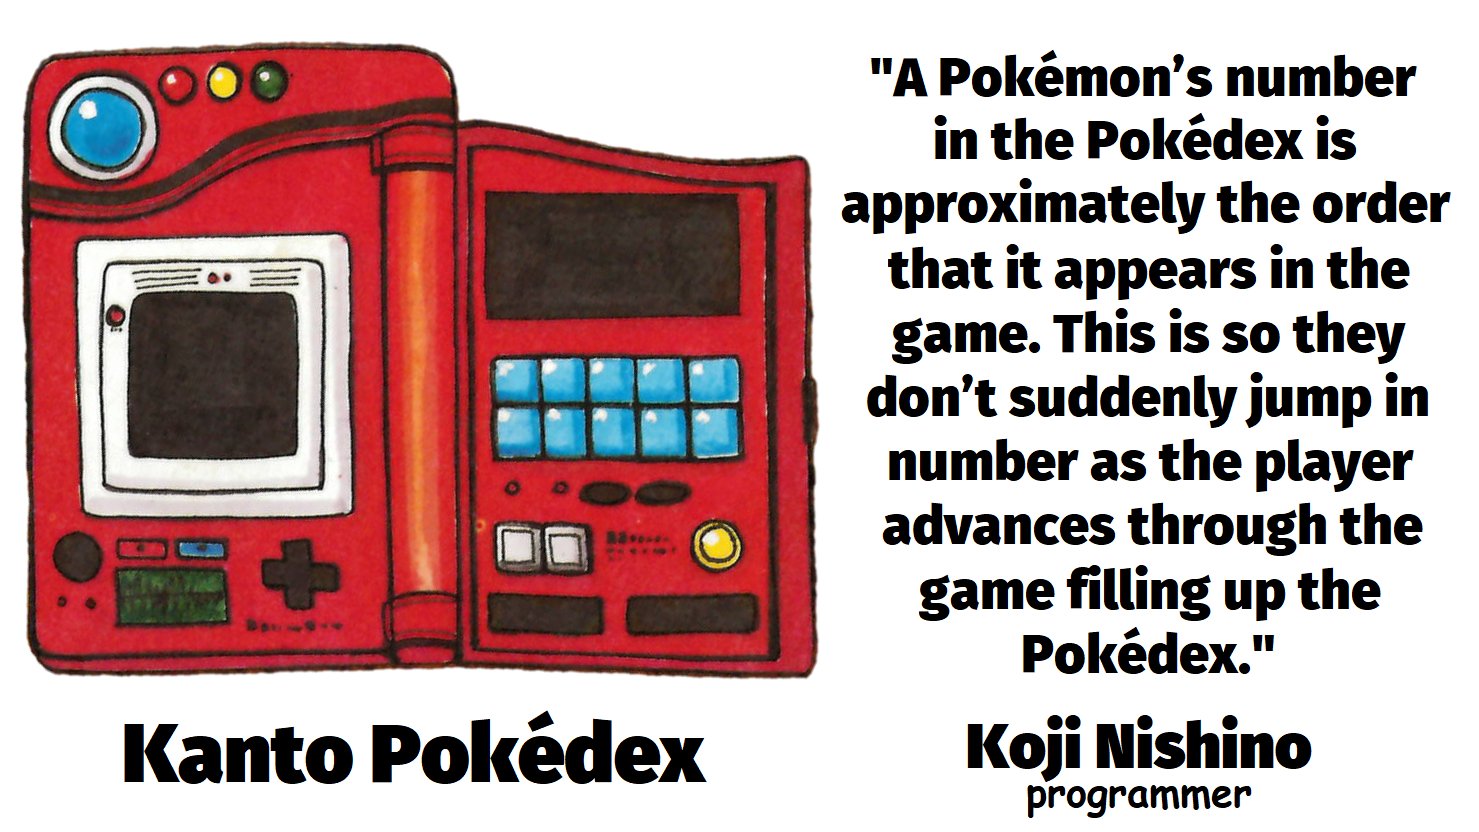 Dr. Lava on X: Pokedex Numbers Explained: According to programmer